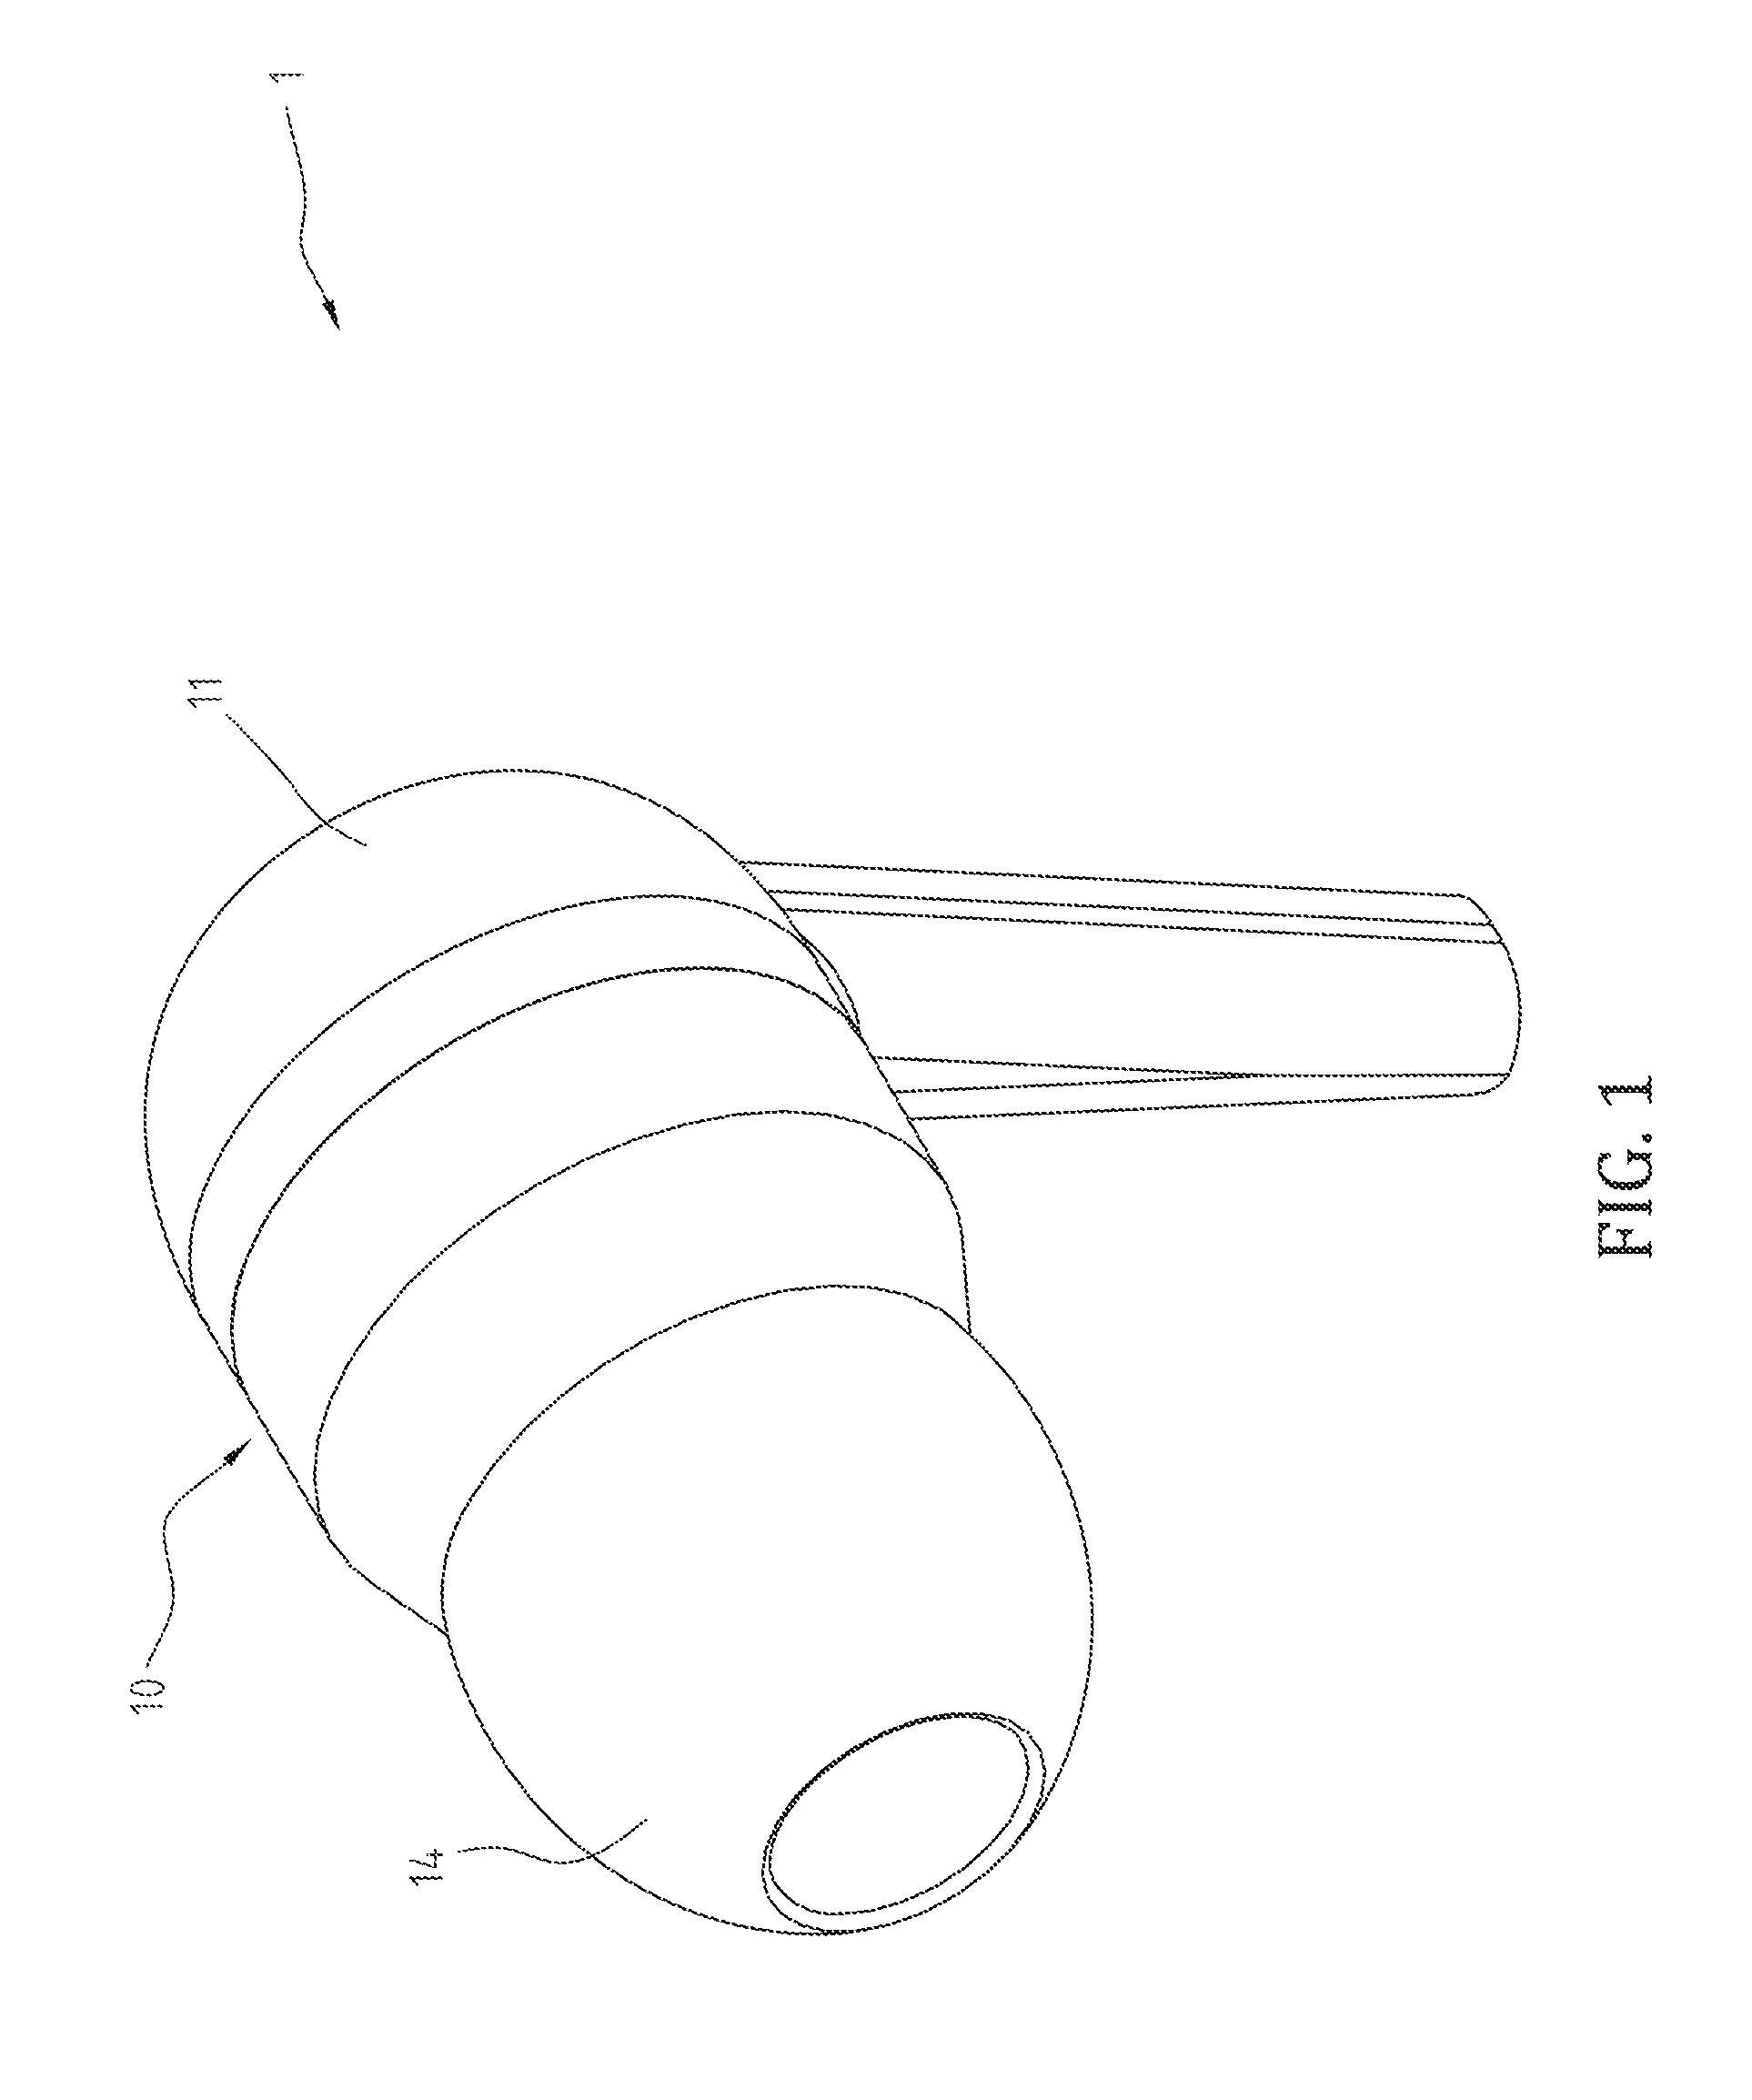 Earphone device having sound guiding structures